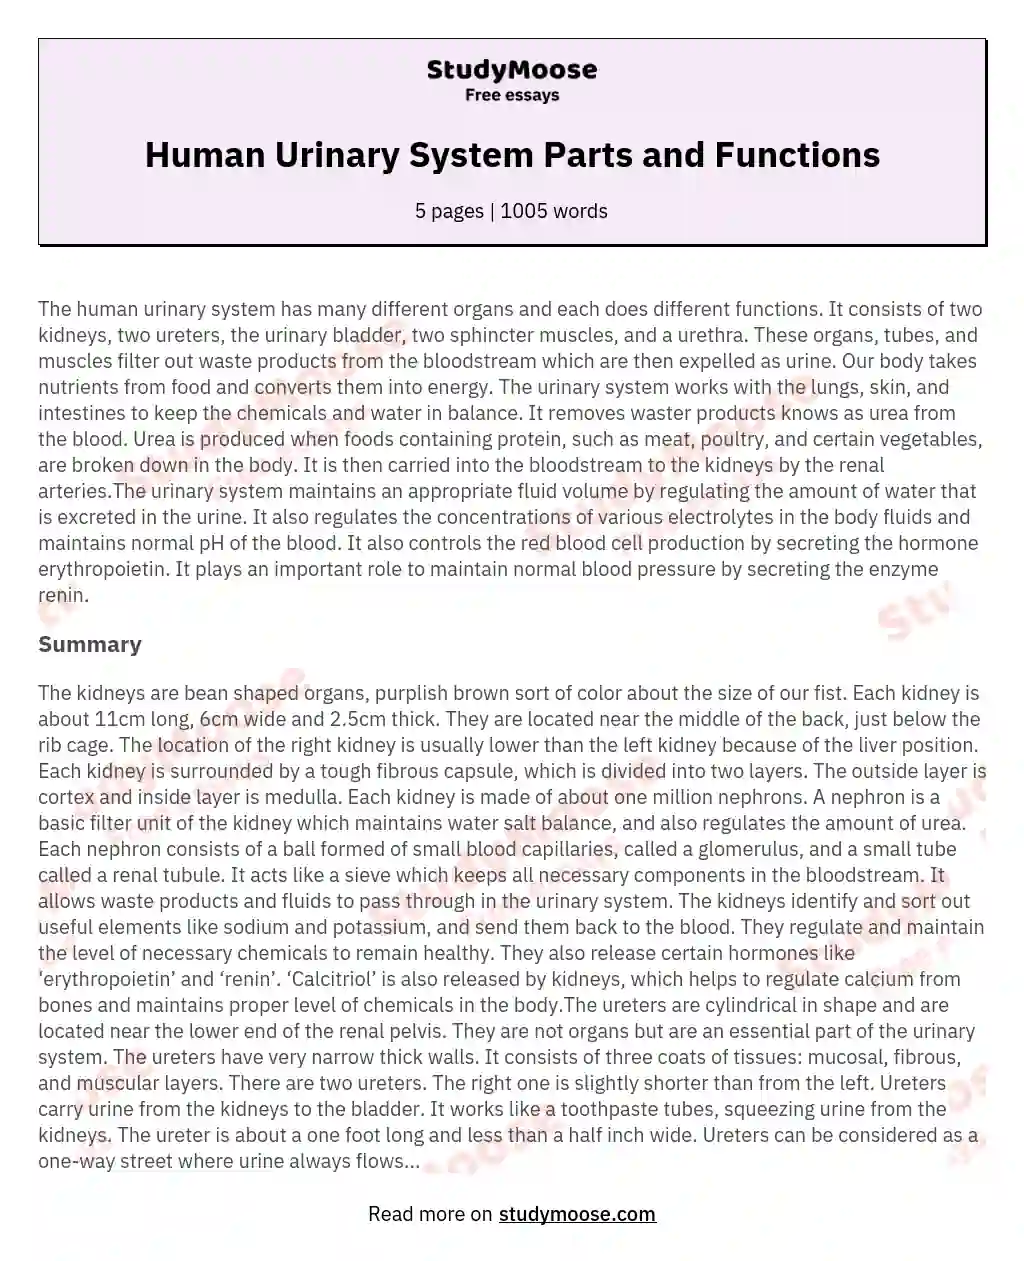 Human Urinary System Parts and Functions essay